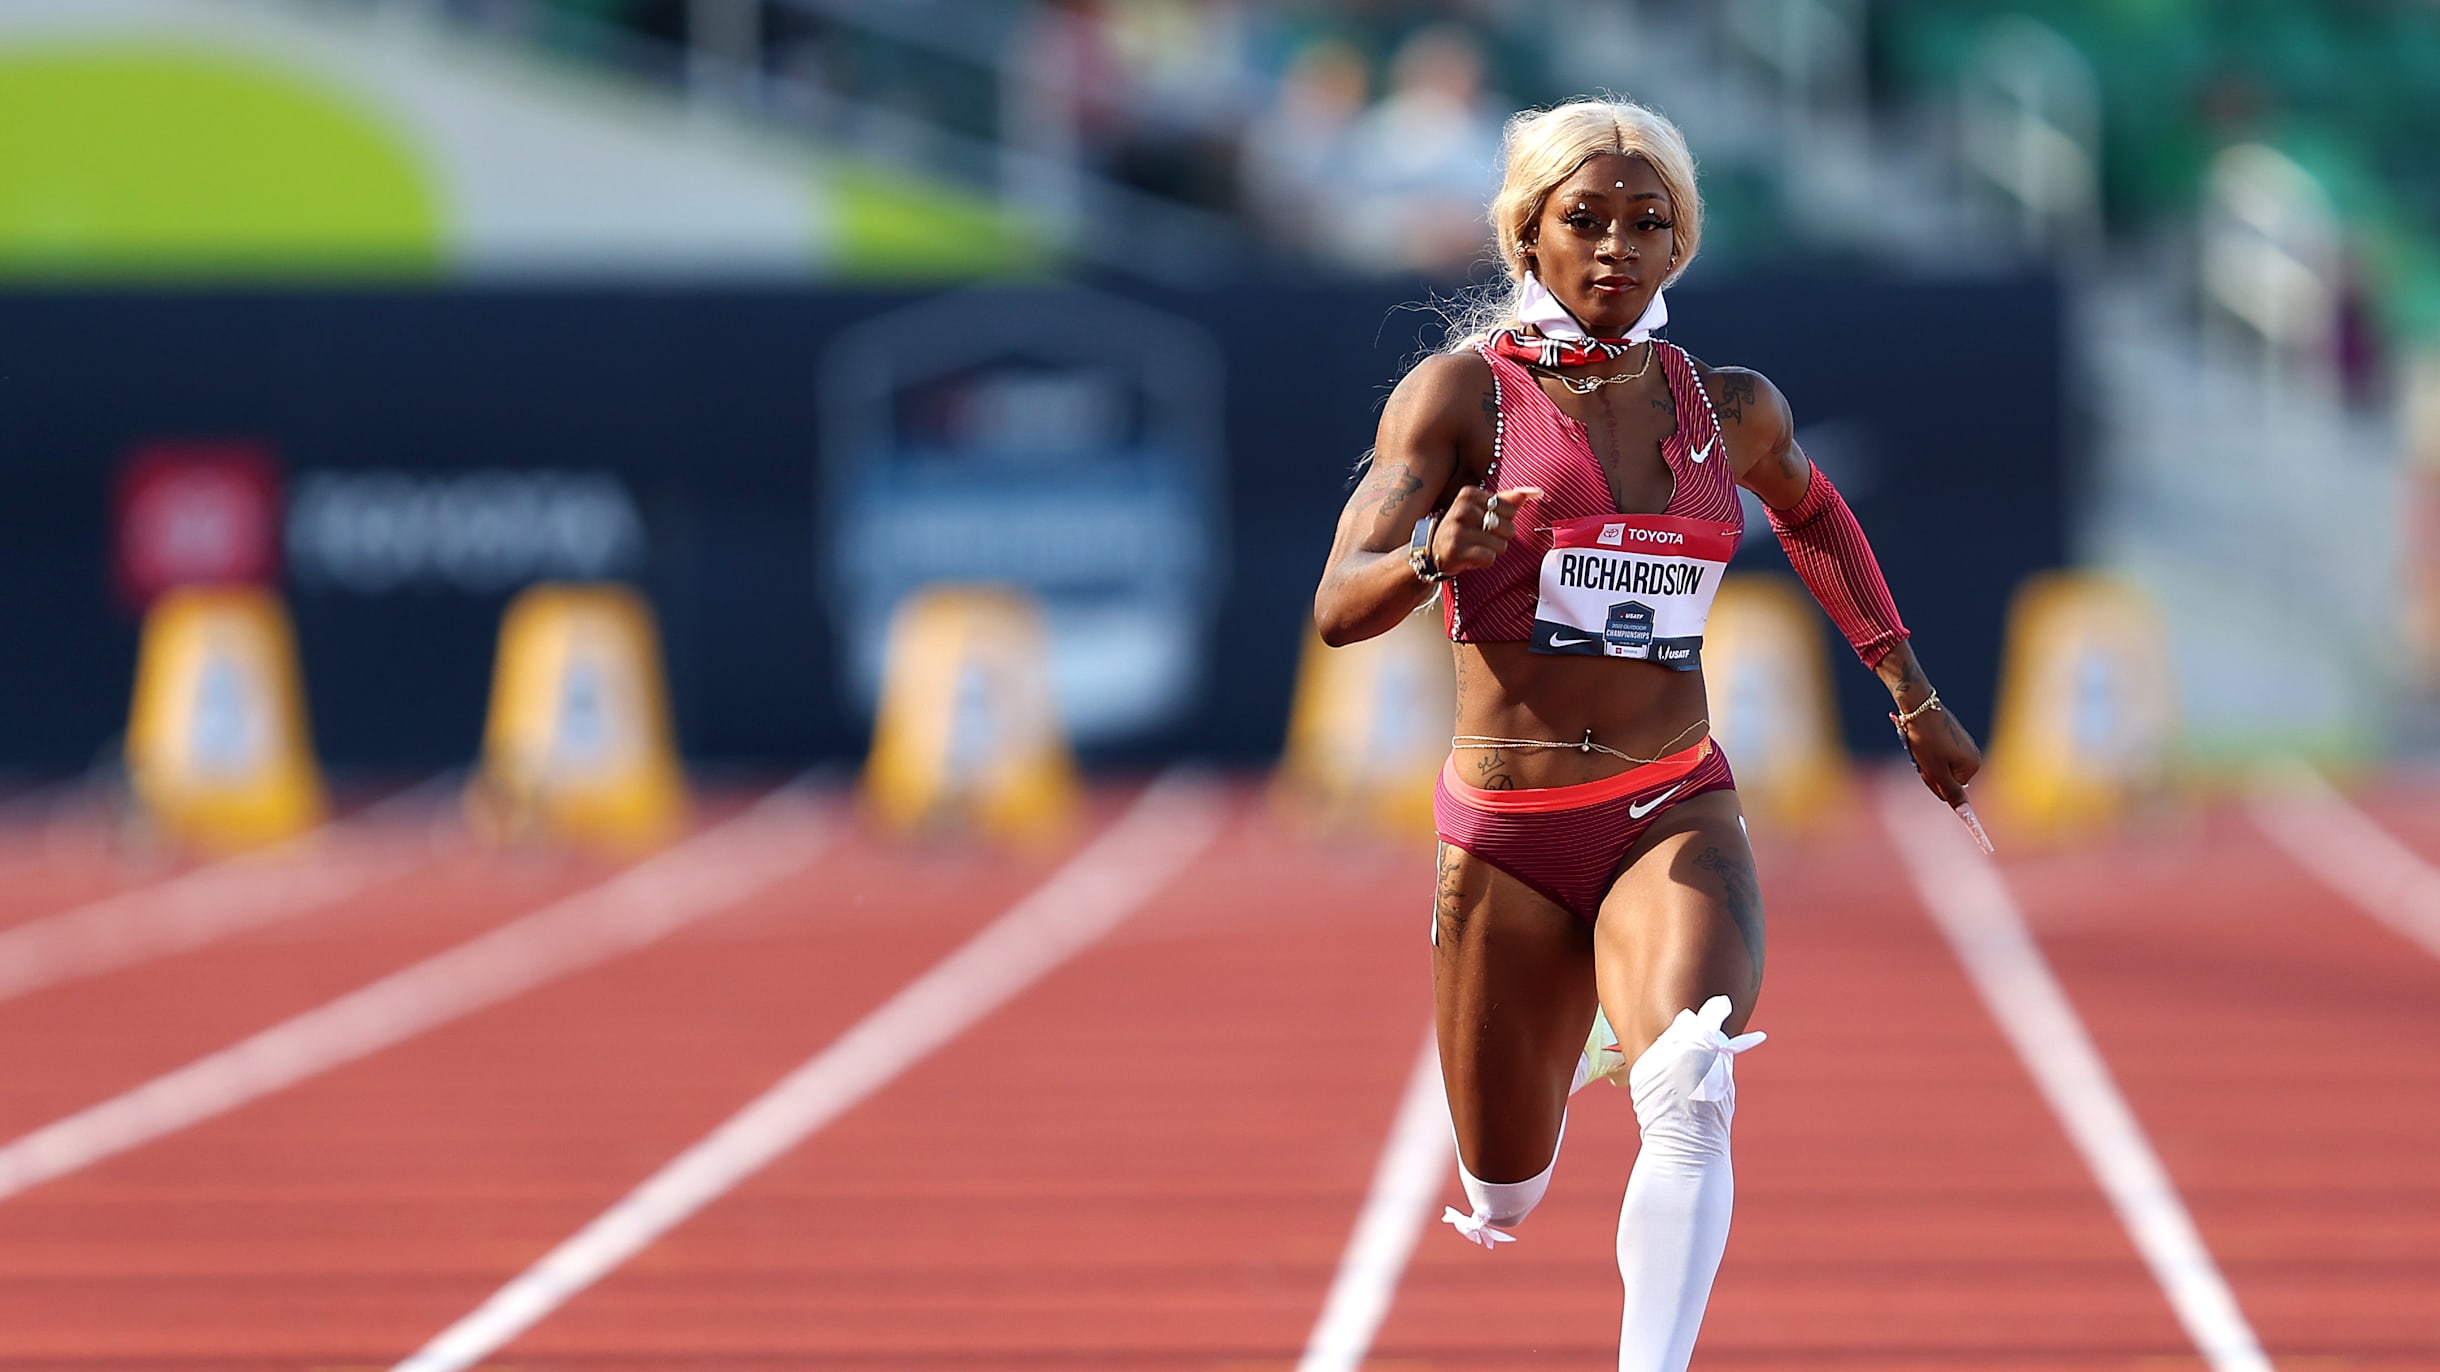 How to watch Sha'Carri Richardson compete at USA Track and Field